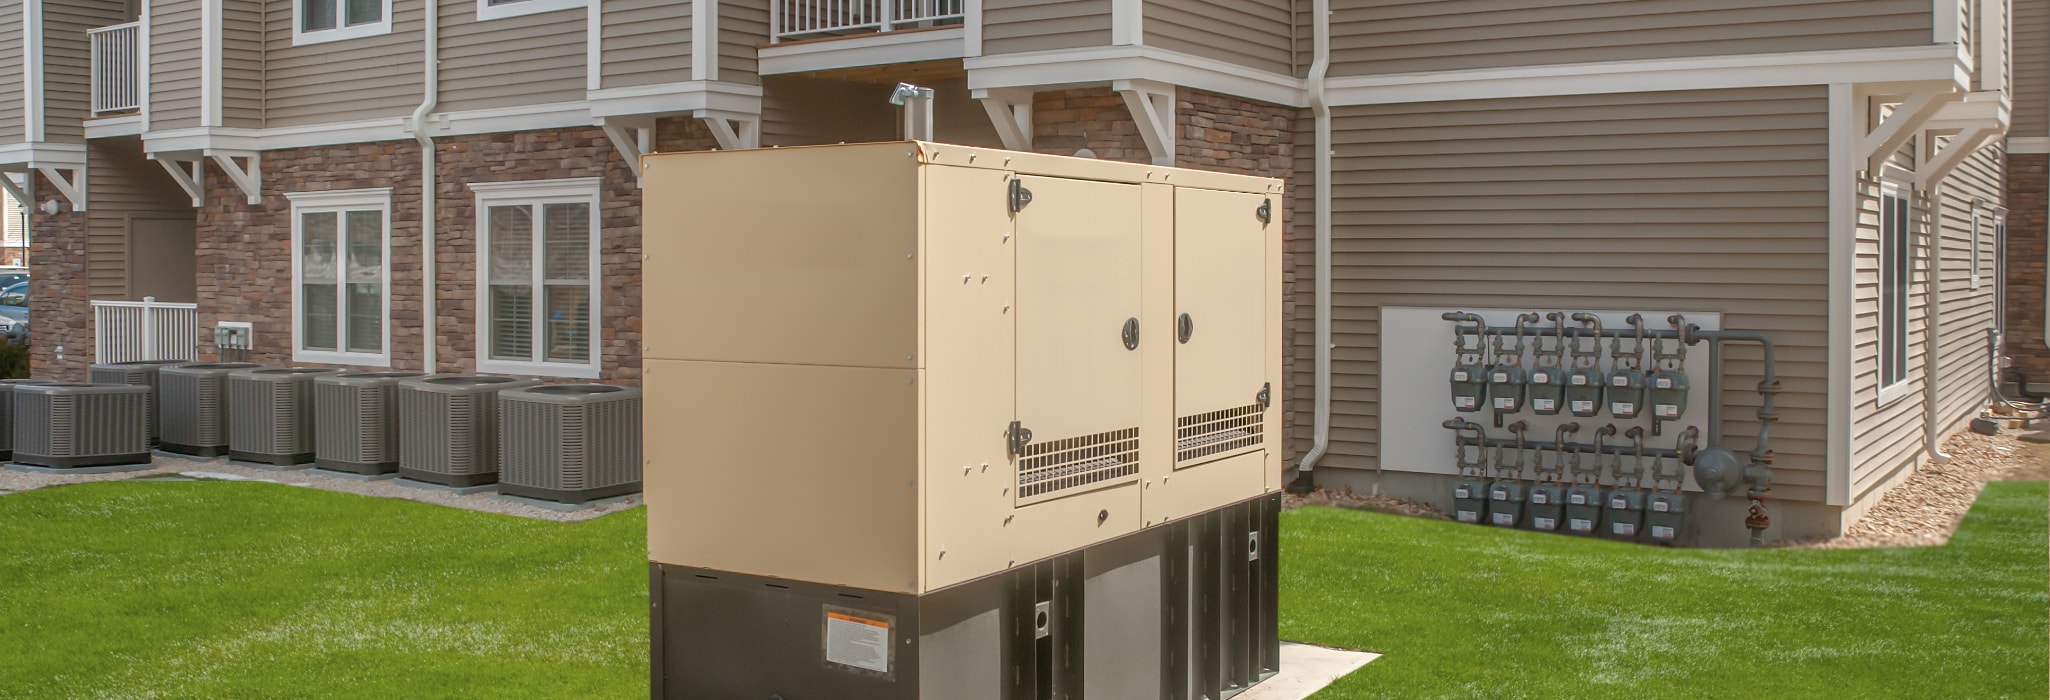 Commercial generator service.